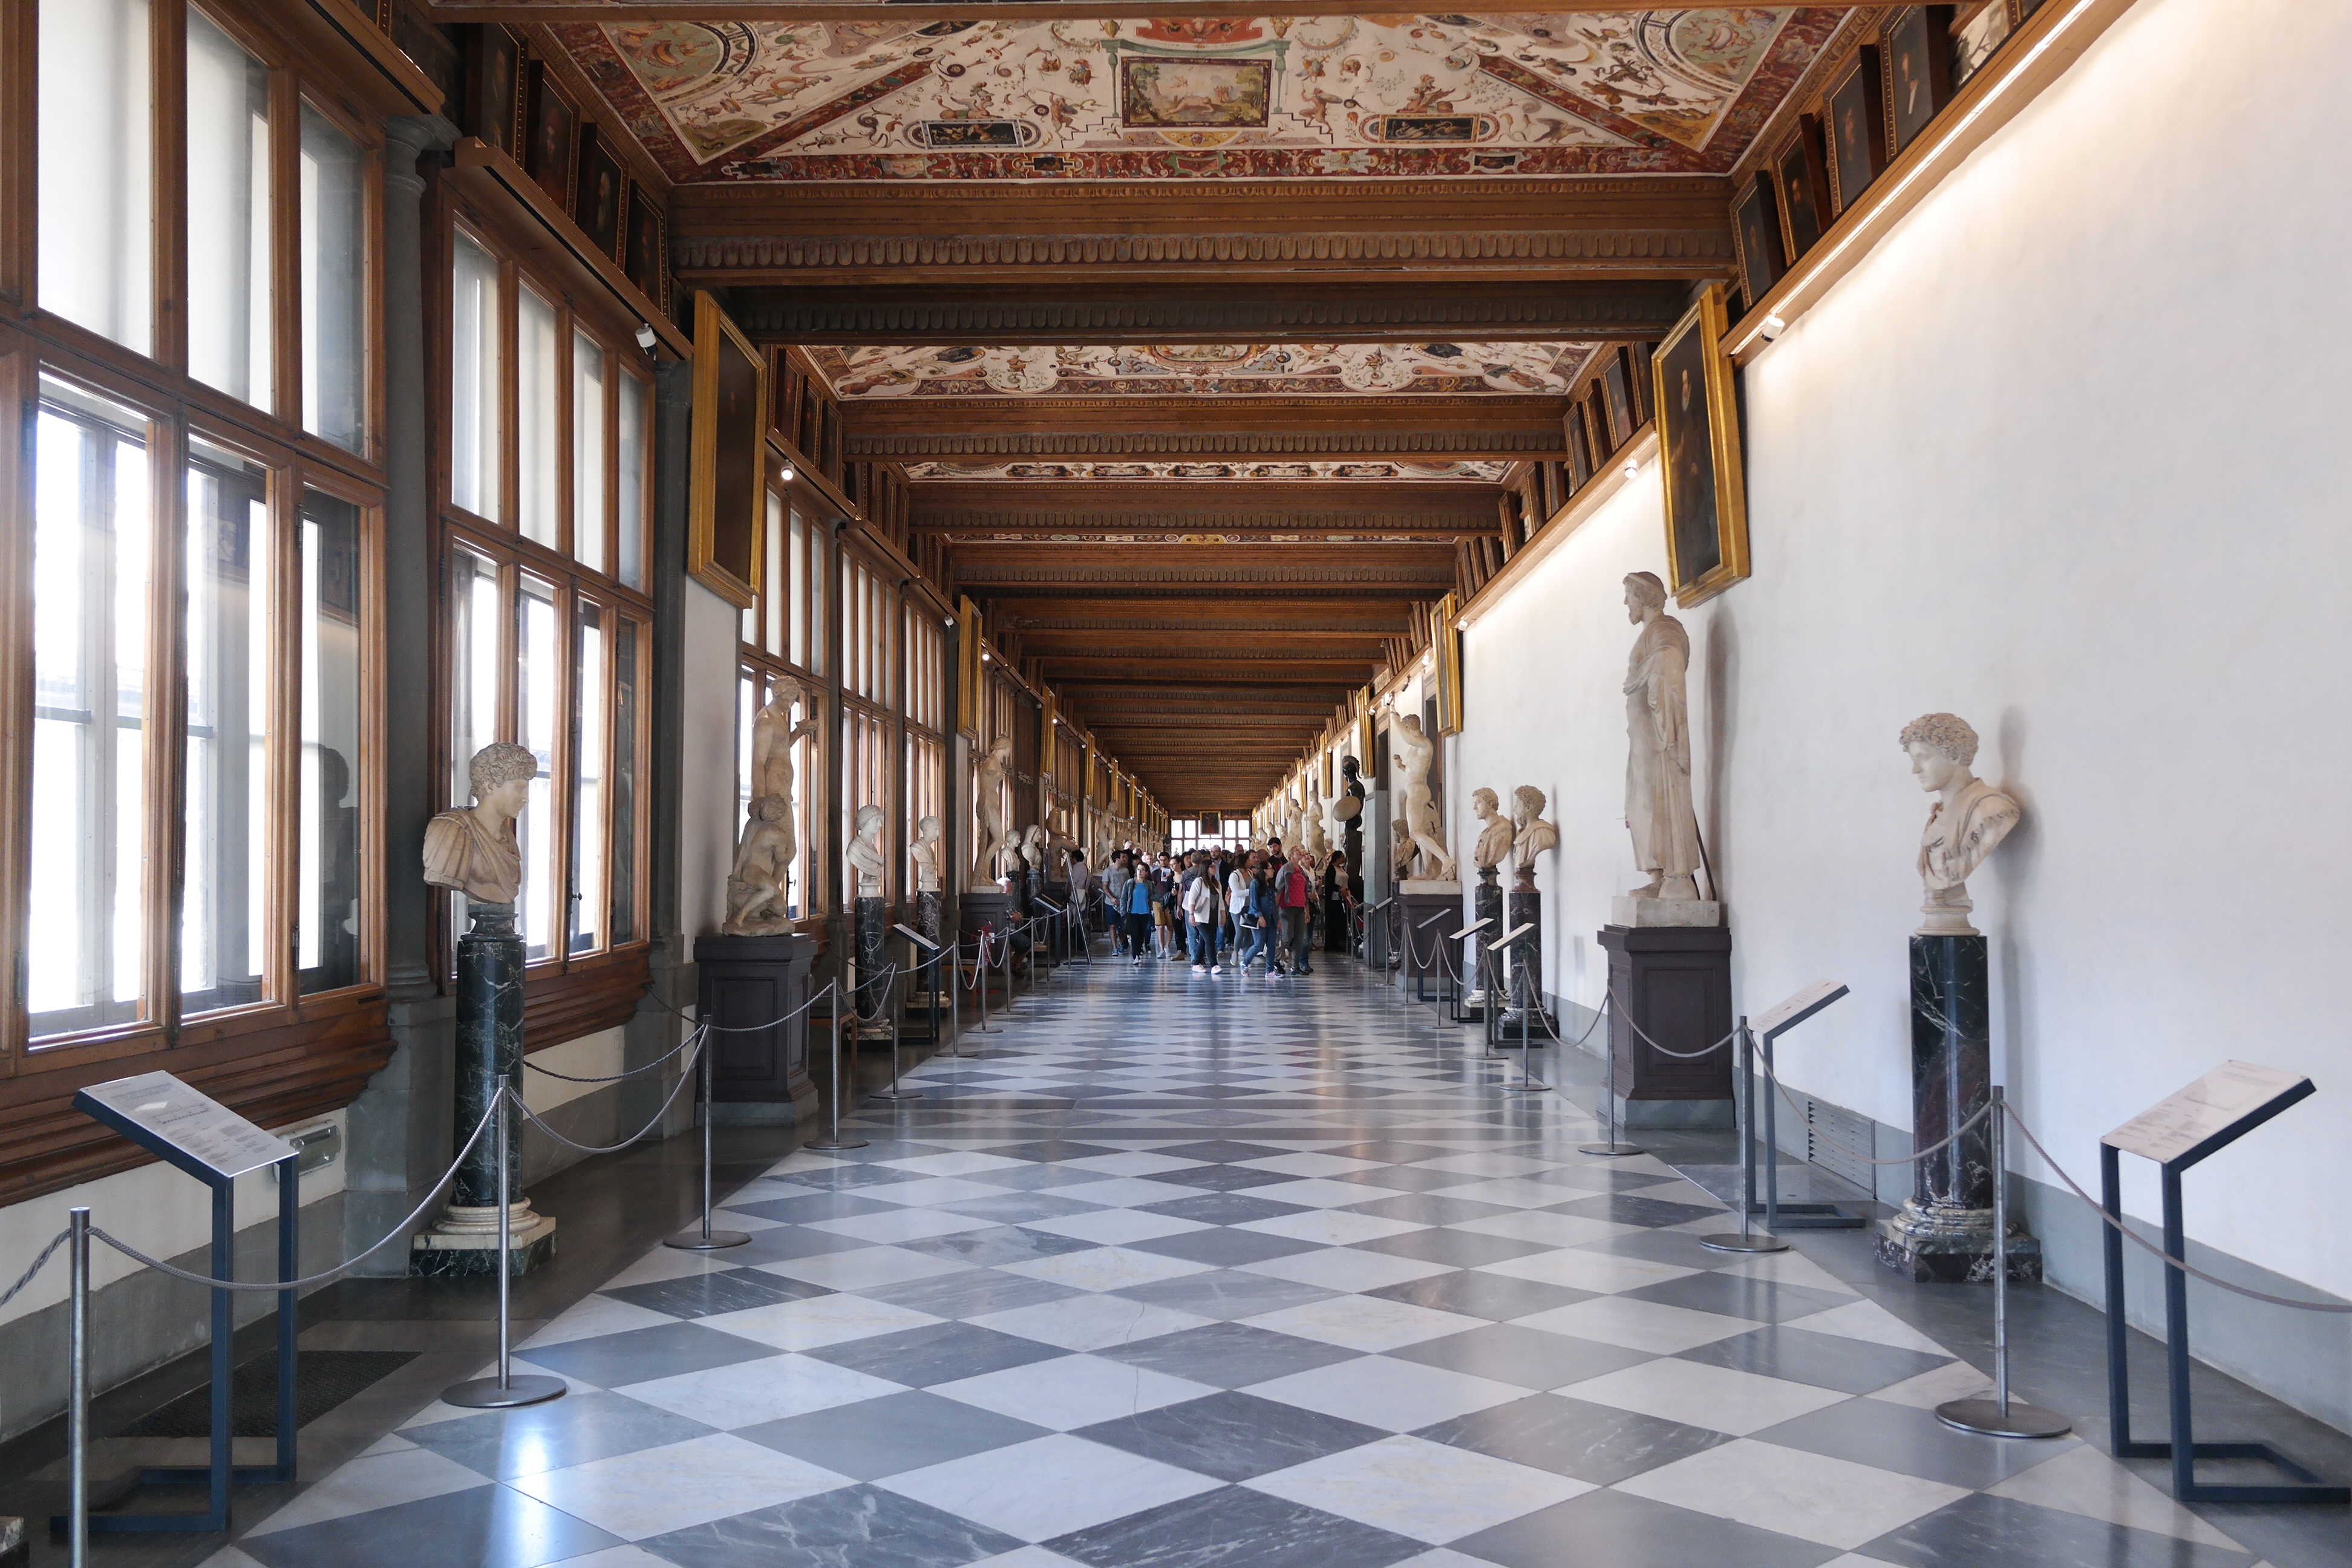 Uffizi Gallery: Top 10 works of art to see